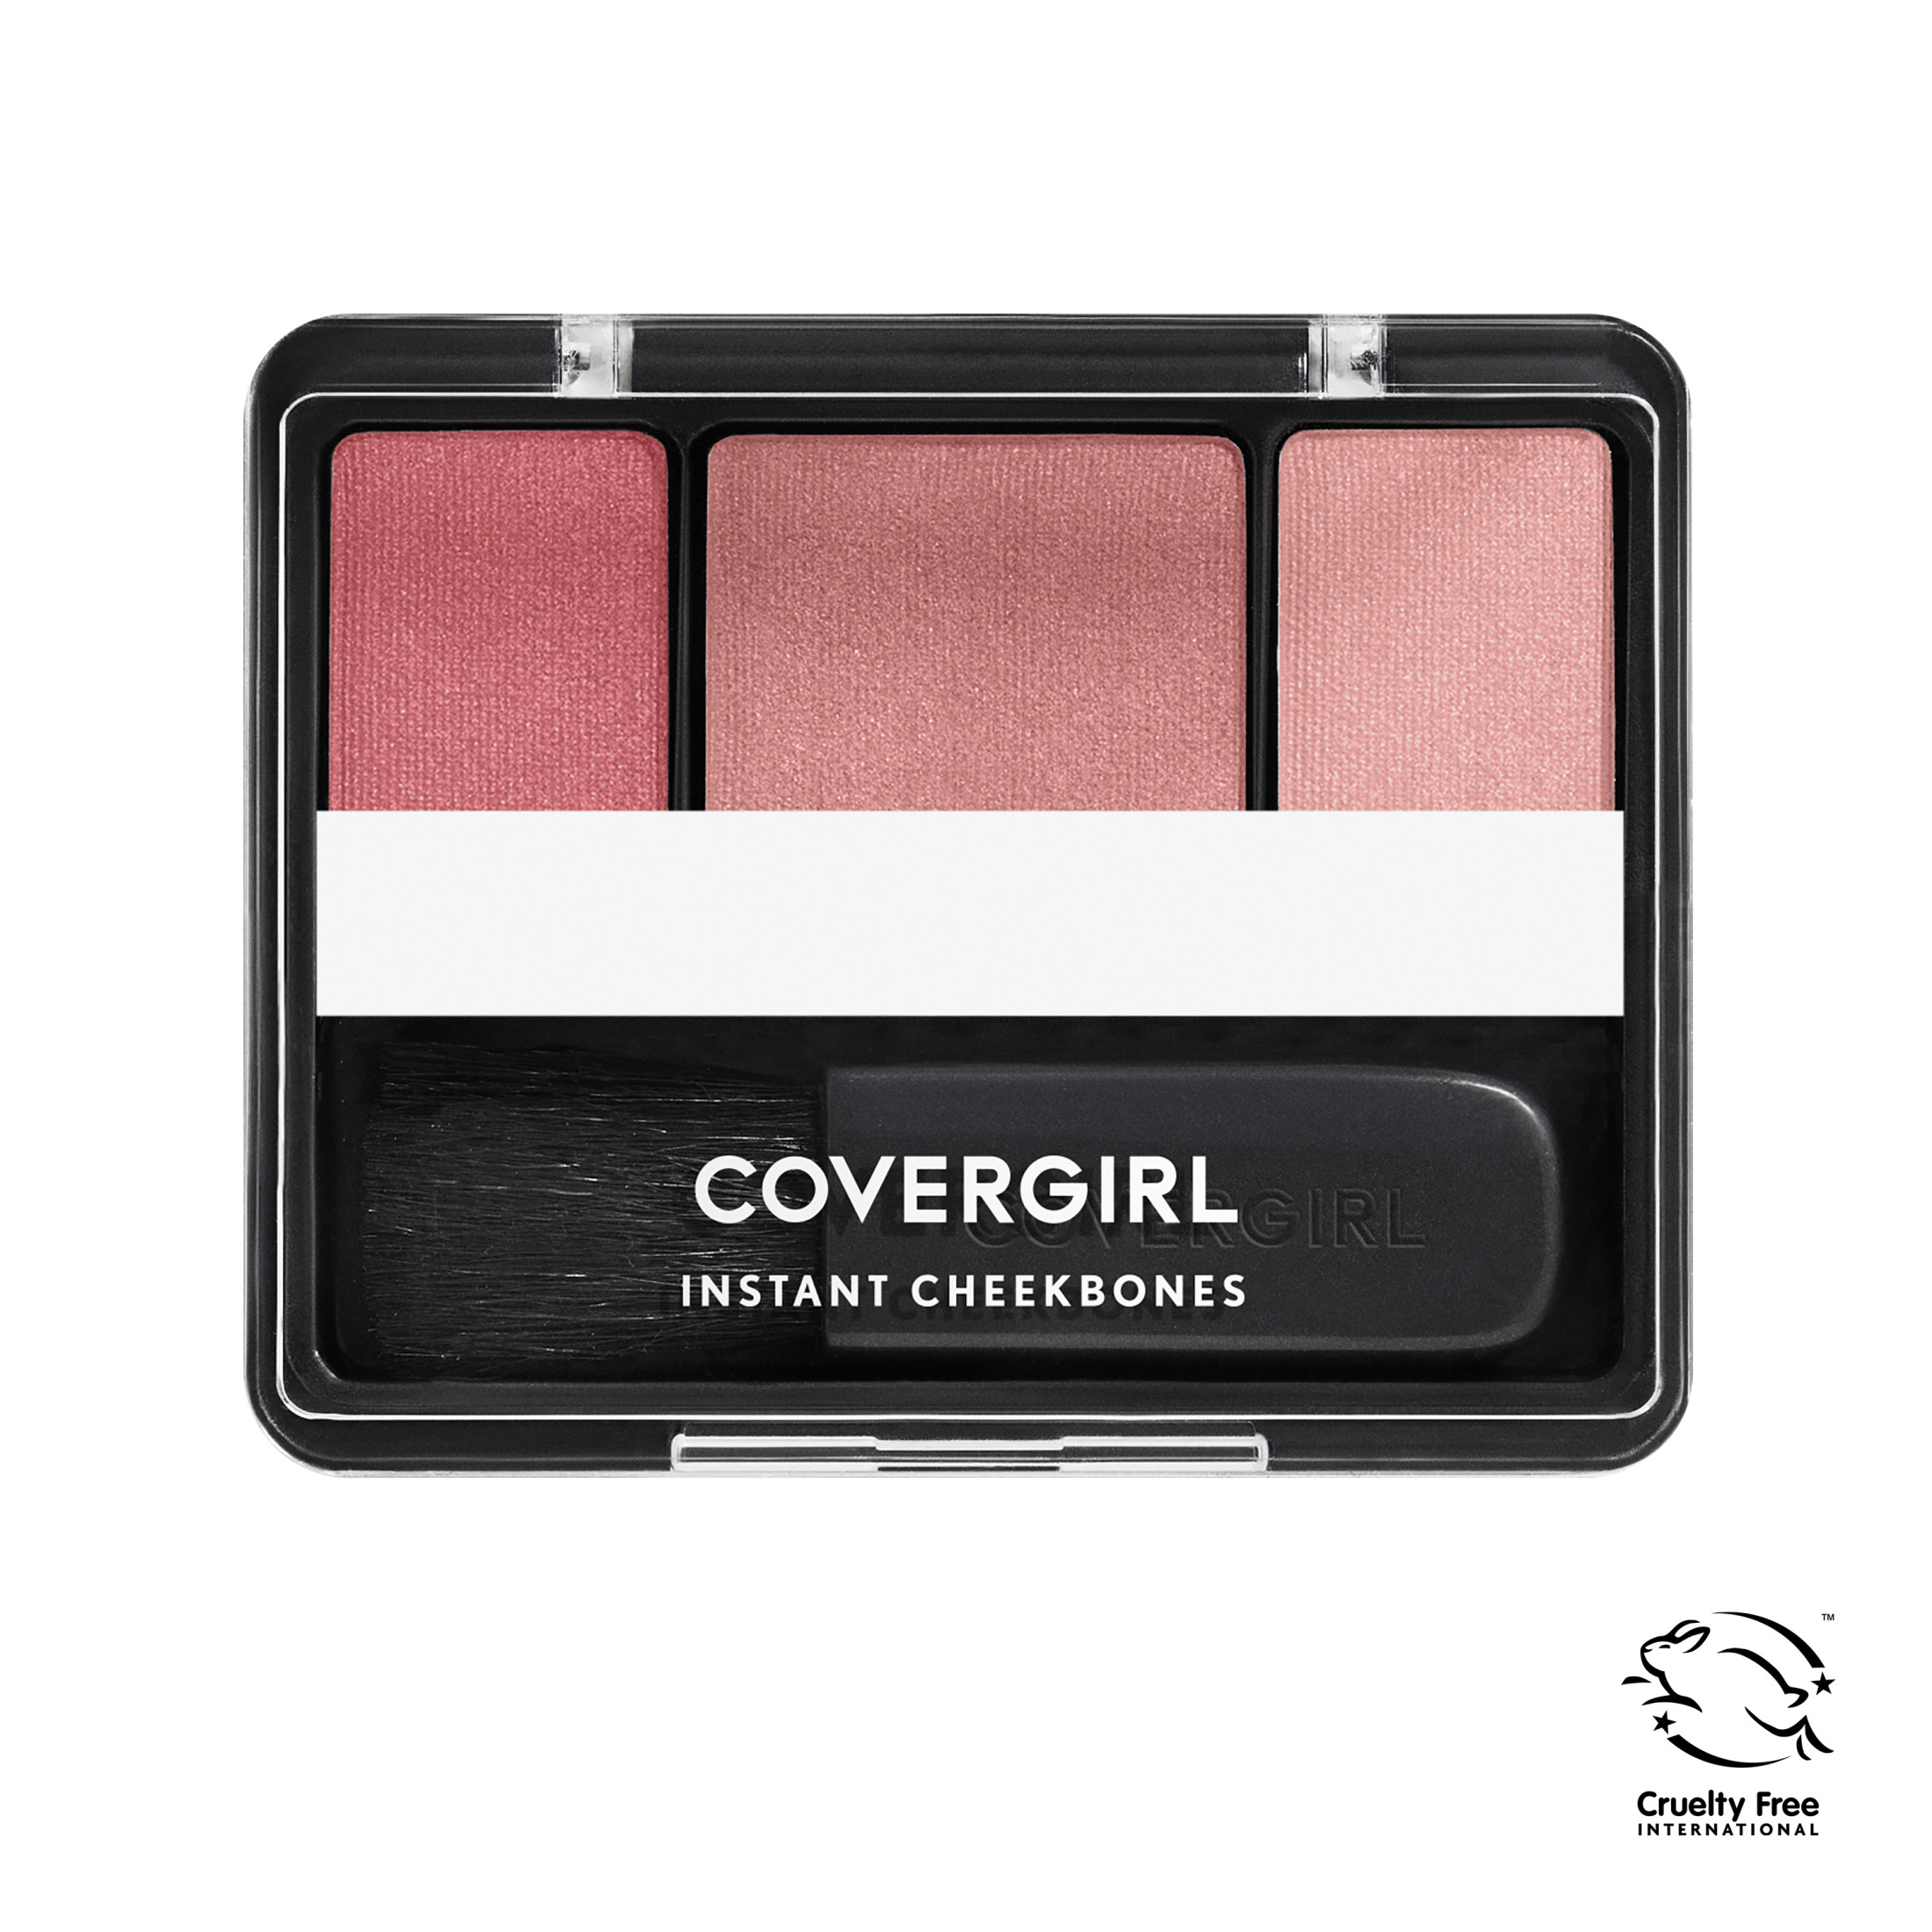 COVERGIRL Instant Cheekbones Contouring Blush, 230 Refined Rose, 0.29 oz - image 1 of 6